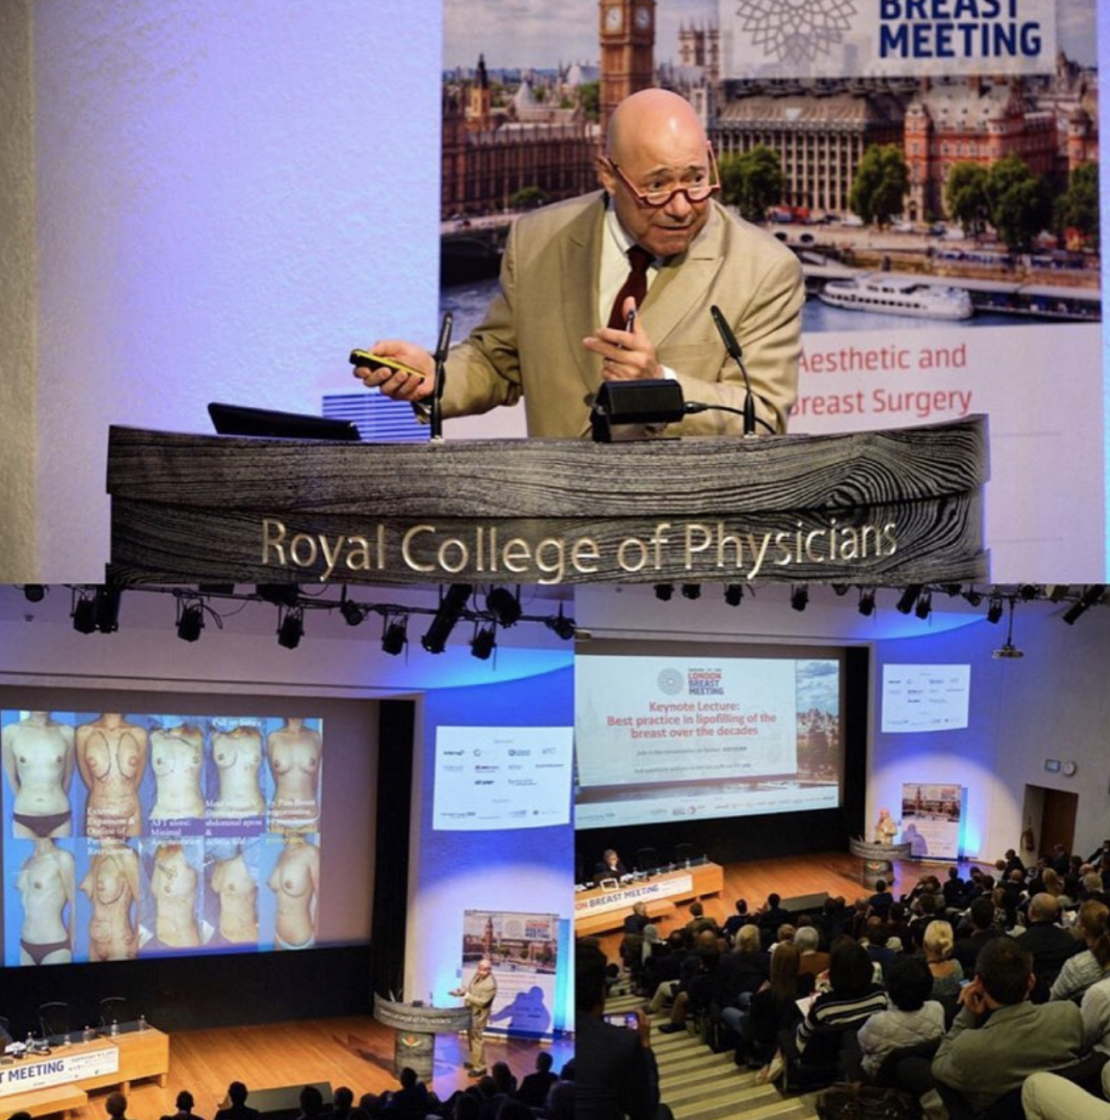 Dr. Roge Khouri at Royal College of Physicians